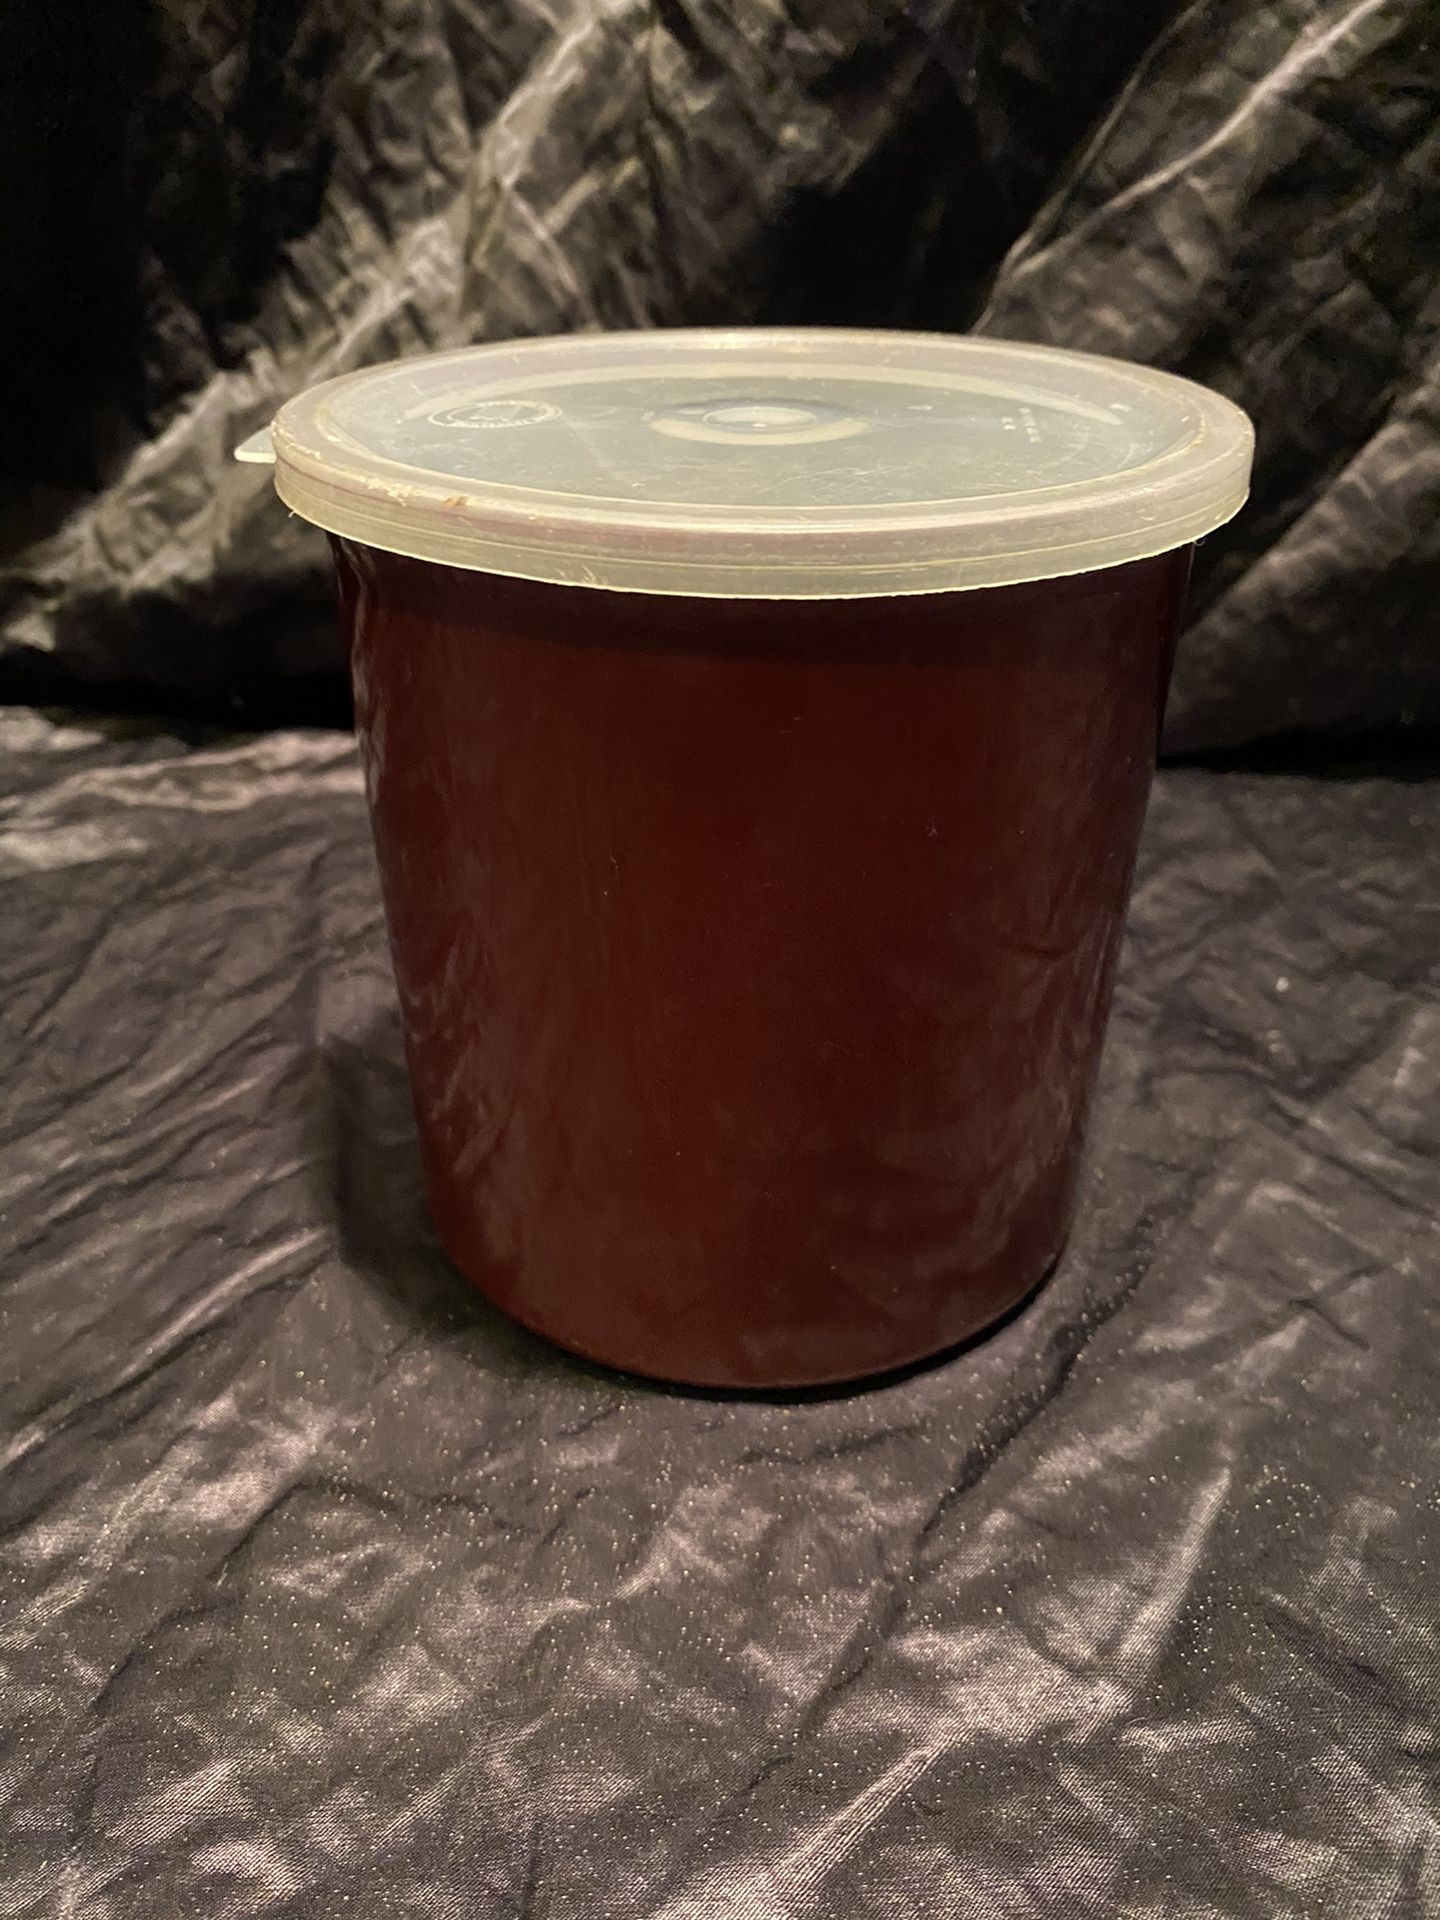 Cambro Crock With Lid Reddish Brown 2.7 qt. Food Container Food Storage